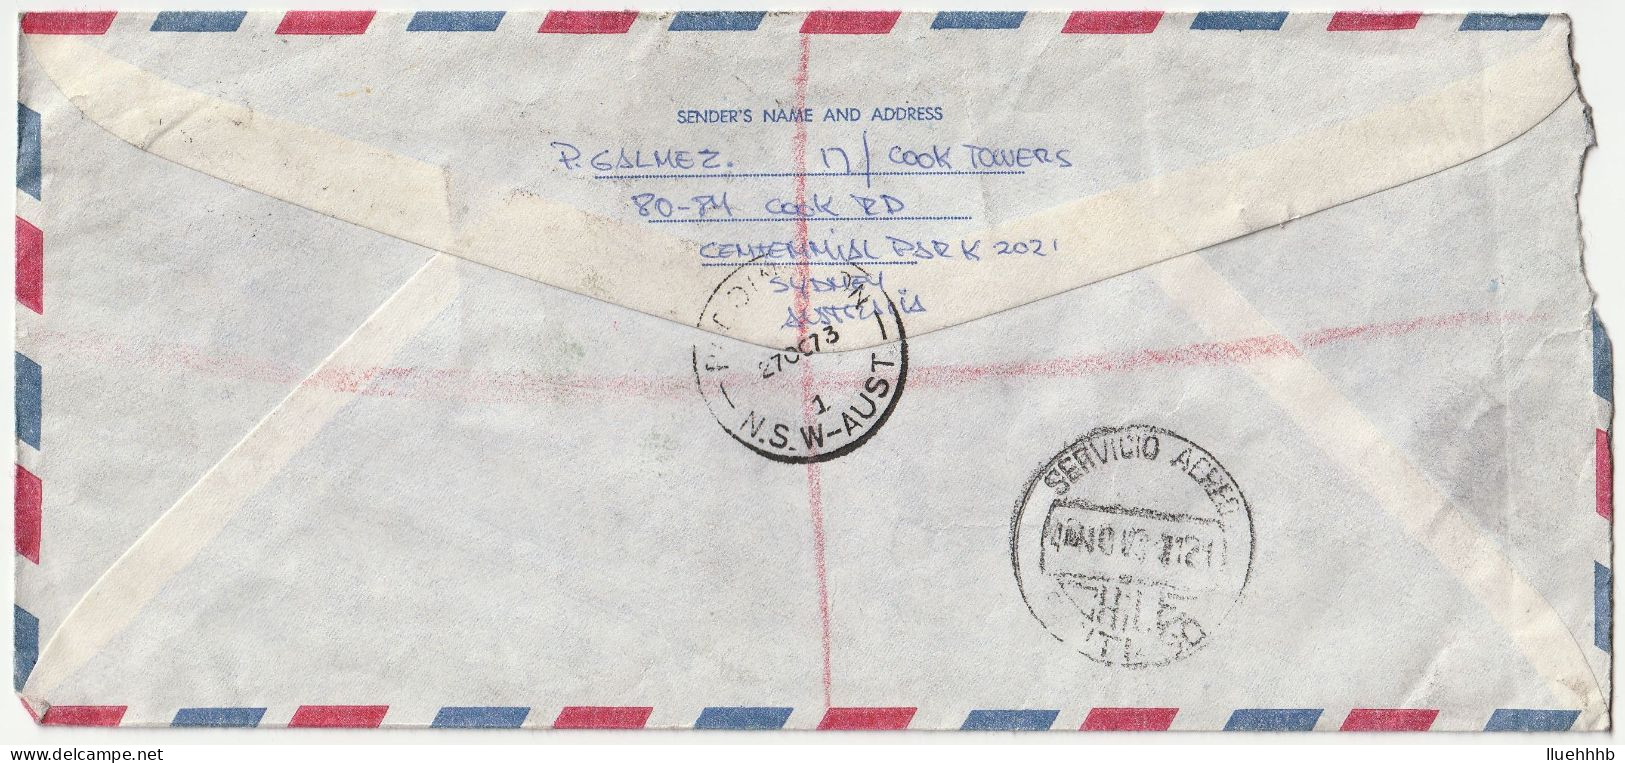 AUSTRALIA: 1973 Registered Airmail Cover To CHILE, $1.05 Rate - Covers & Documents